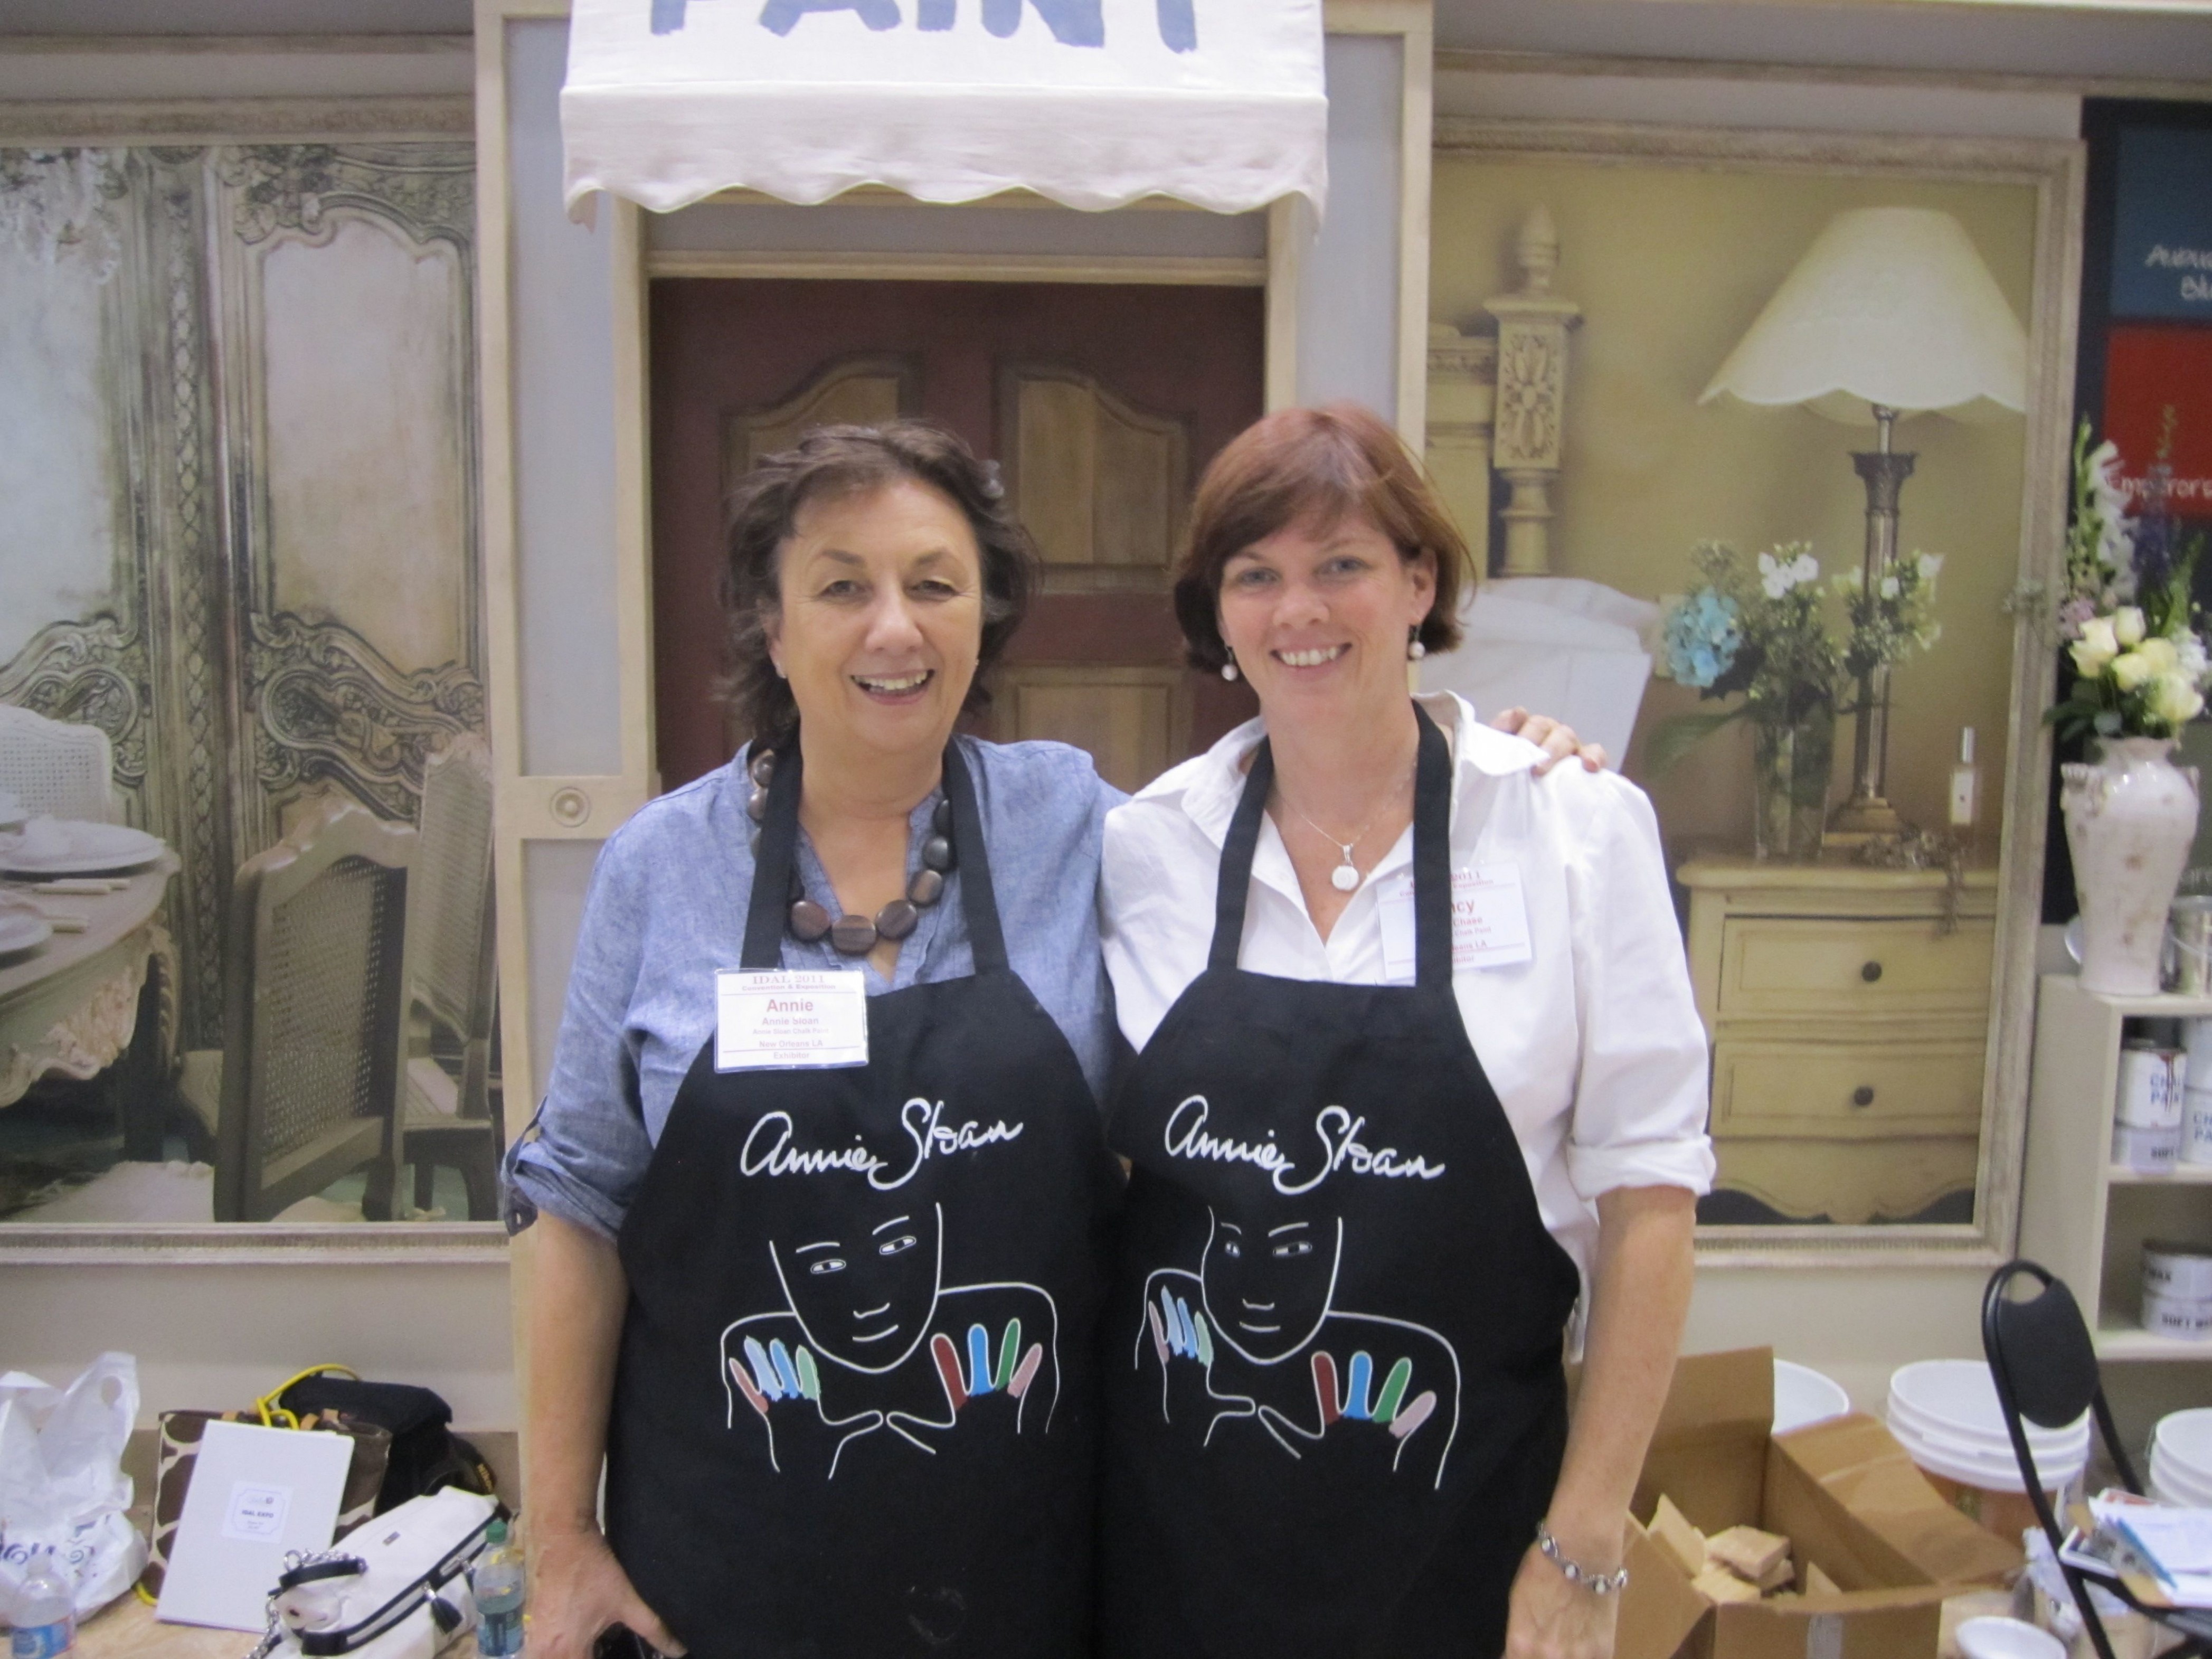 The Annie Sloan American Tour And Chalk Paint Giveaway Value $10 Where To Buy Annie Sloan Chalk Paint In Nashville